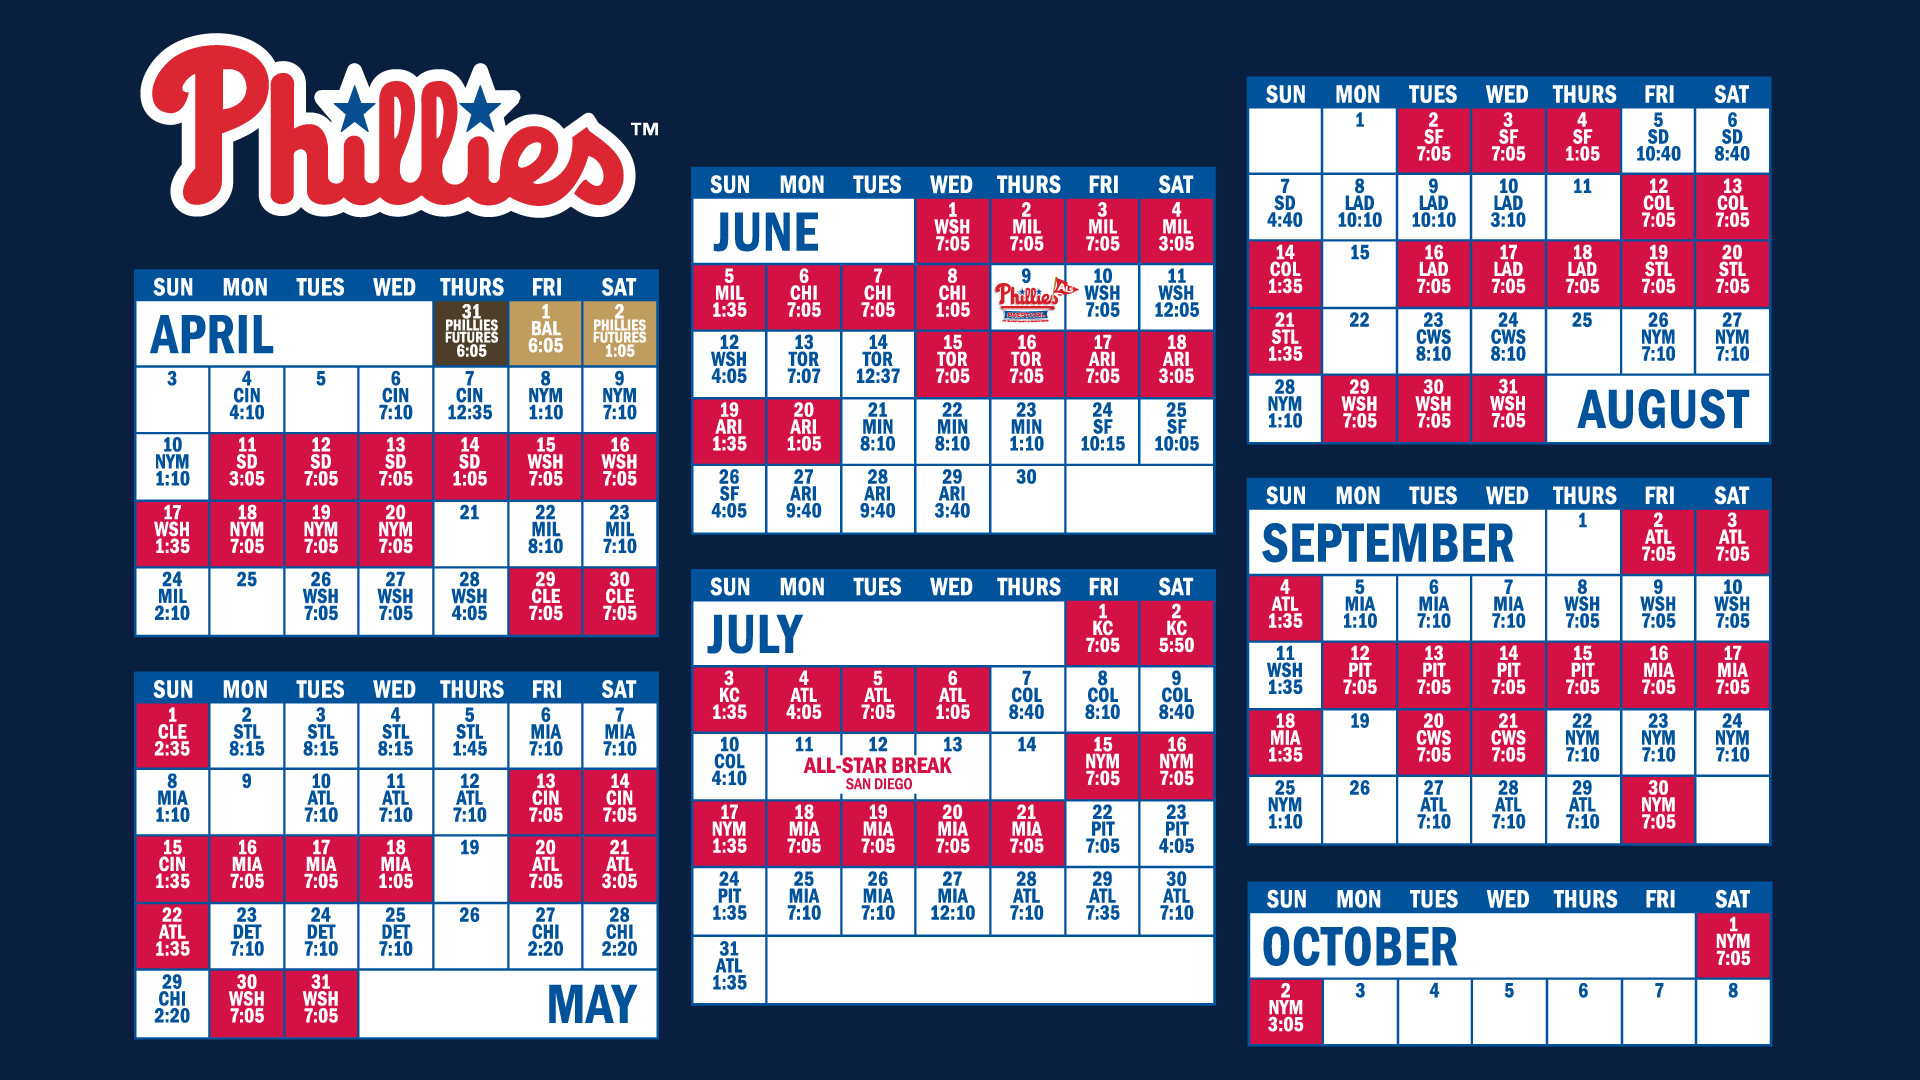 1920x1080 My husband requested a simple Phillies Schedule desktop wallpaper .